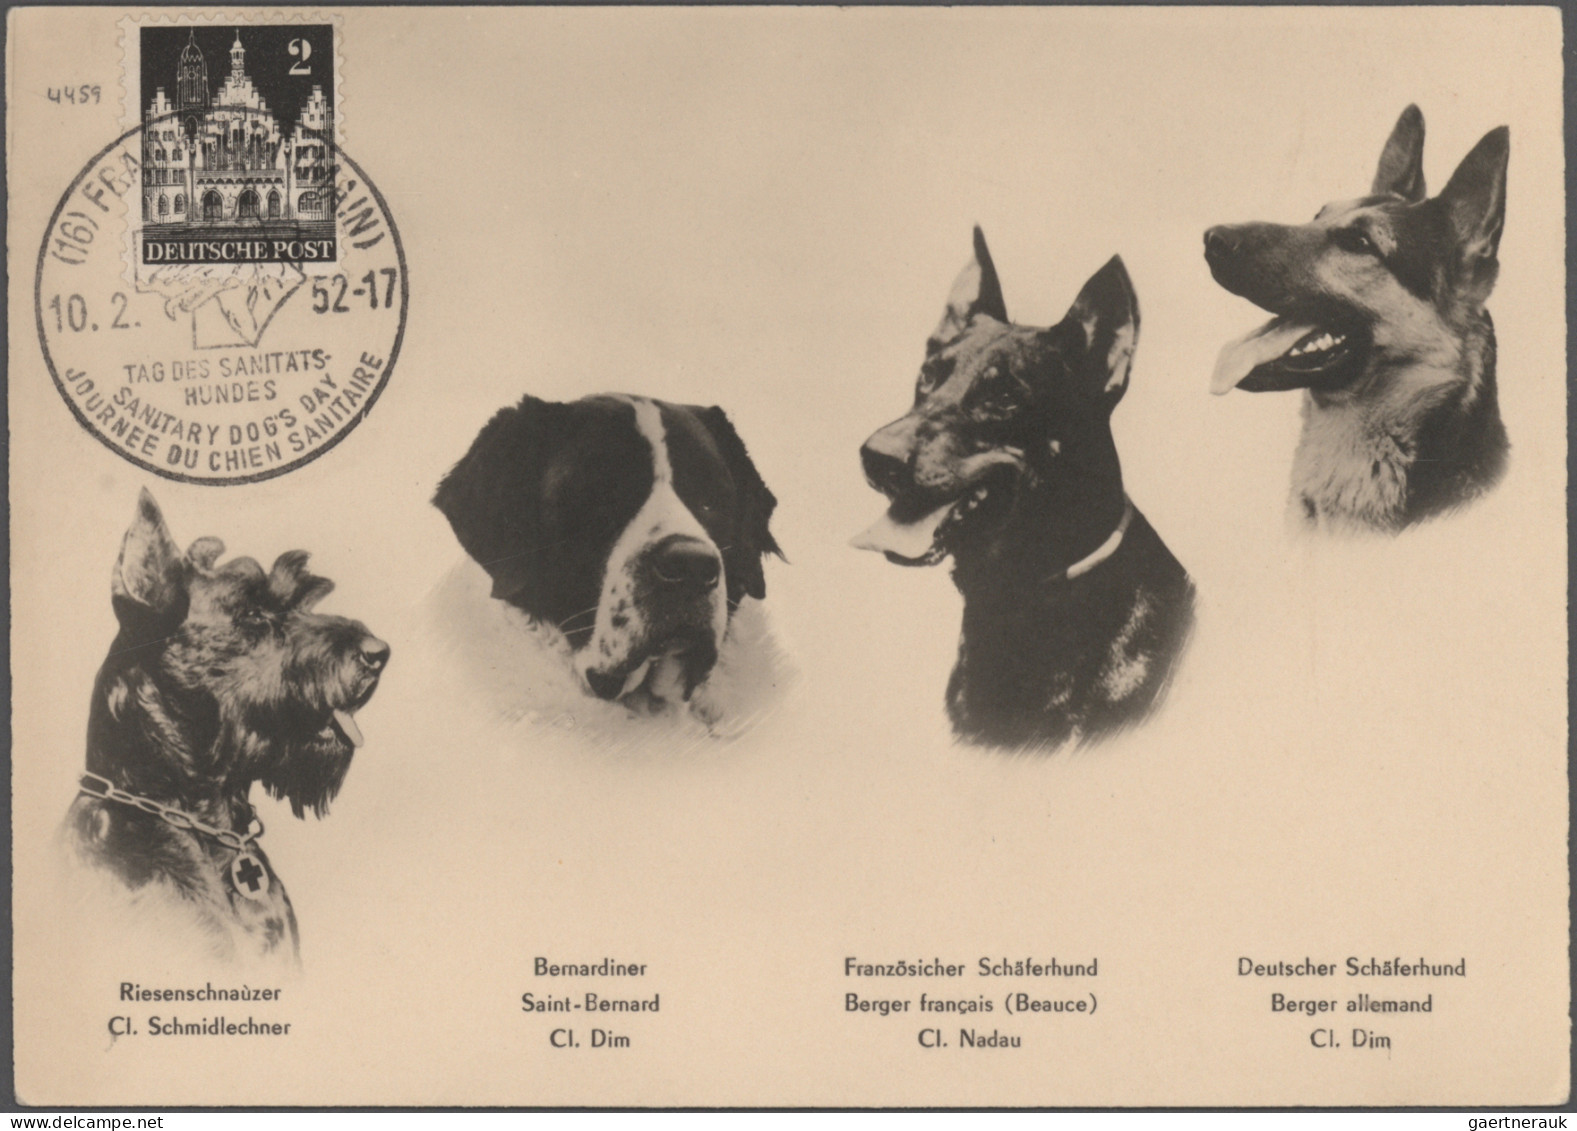 Thematics: animals-dogs: 1900/2000 (ca.), sophisticated collection/balance of ap